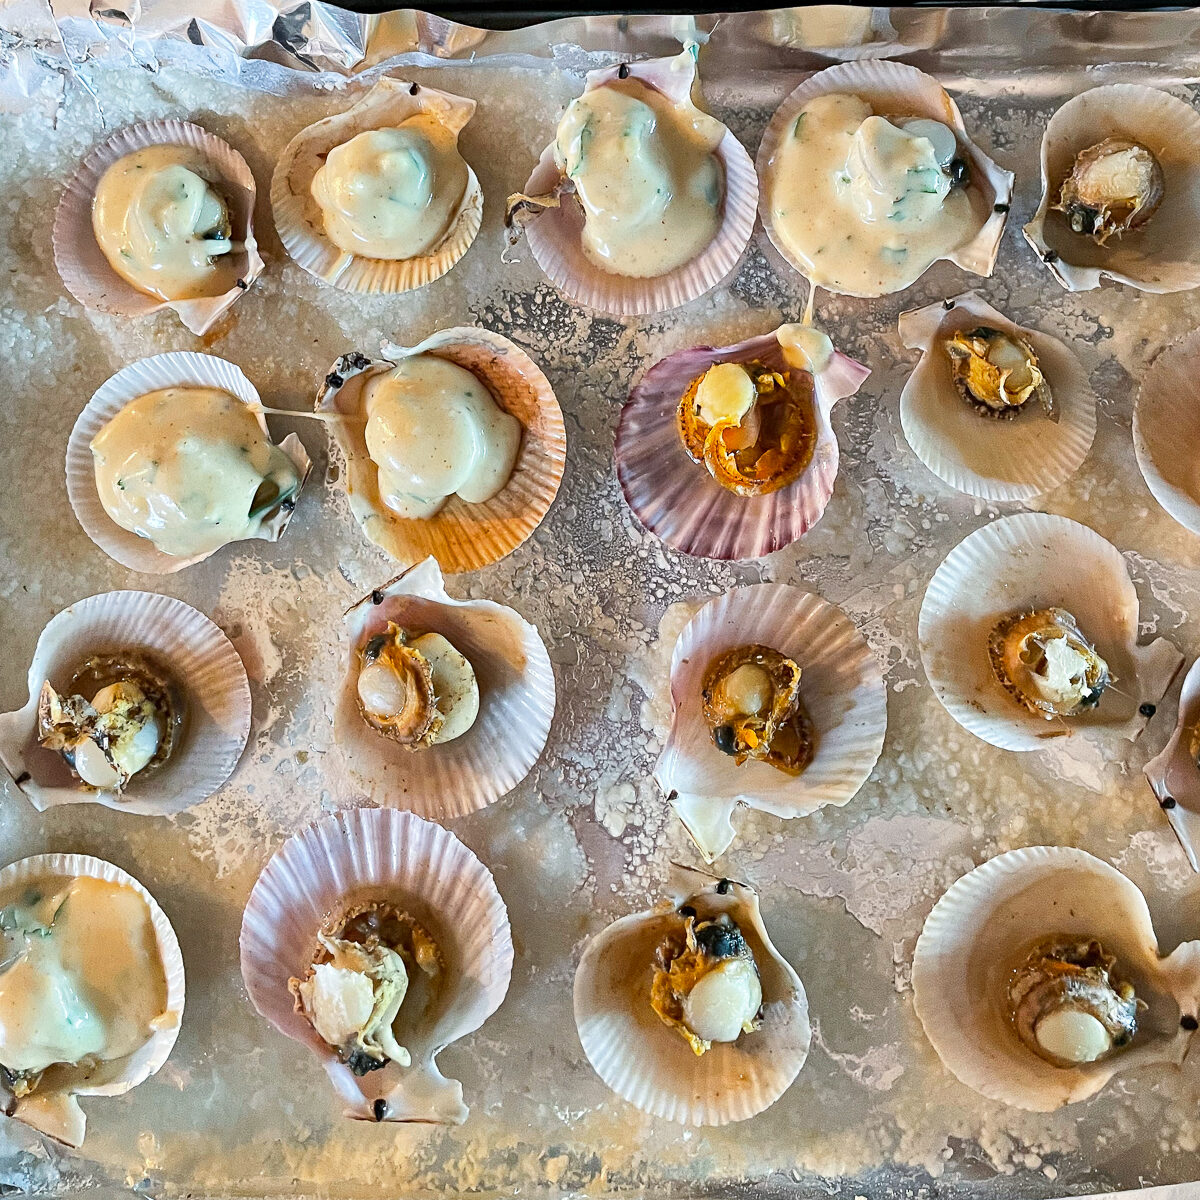 Scallops on baking sheet with top shell removed. Sauce has been added on top of half of them so far, before being broiled.